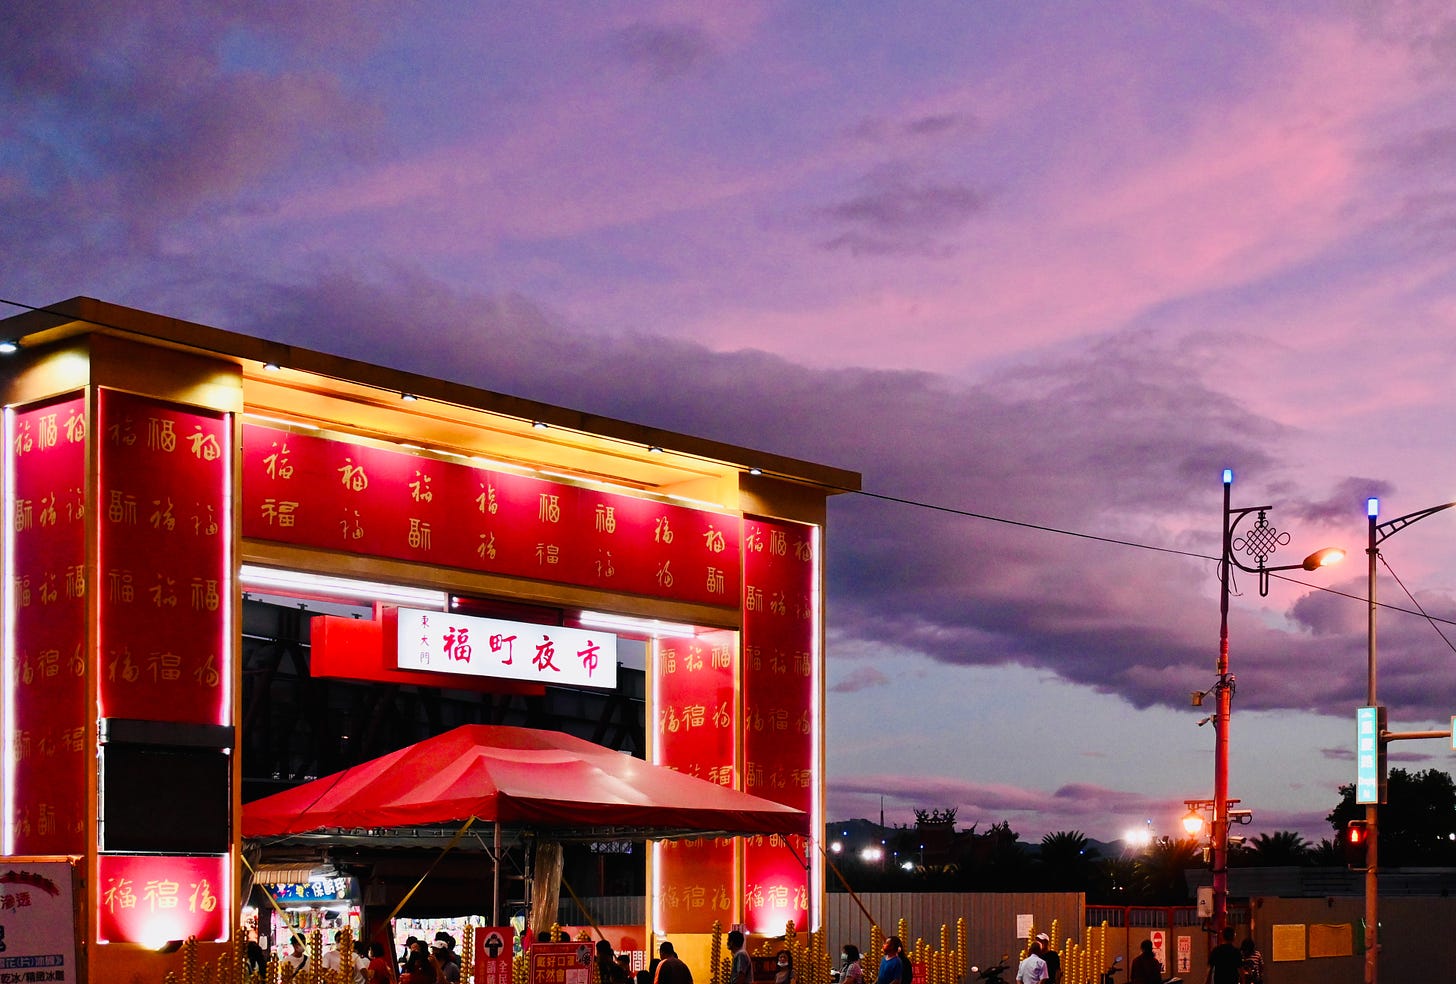 A spectacular sunset turns the clouds purple above the massive red gate to Dongdamen 東大門 night market in Hualien 花蓮, Taiwan